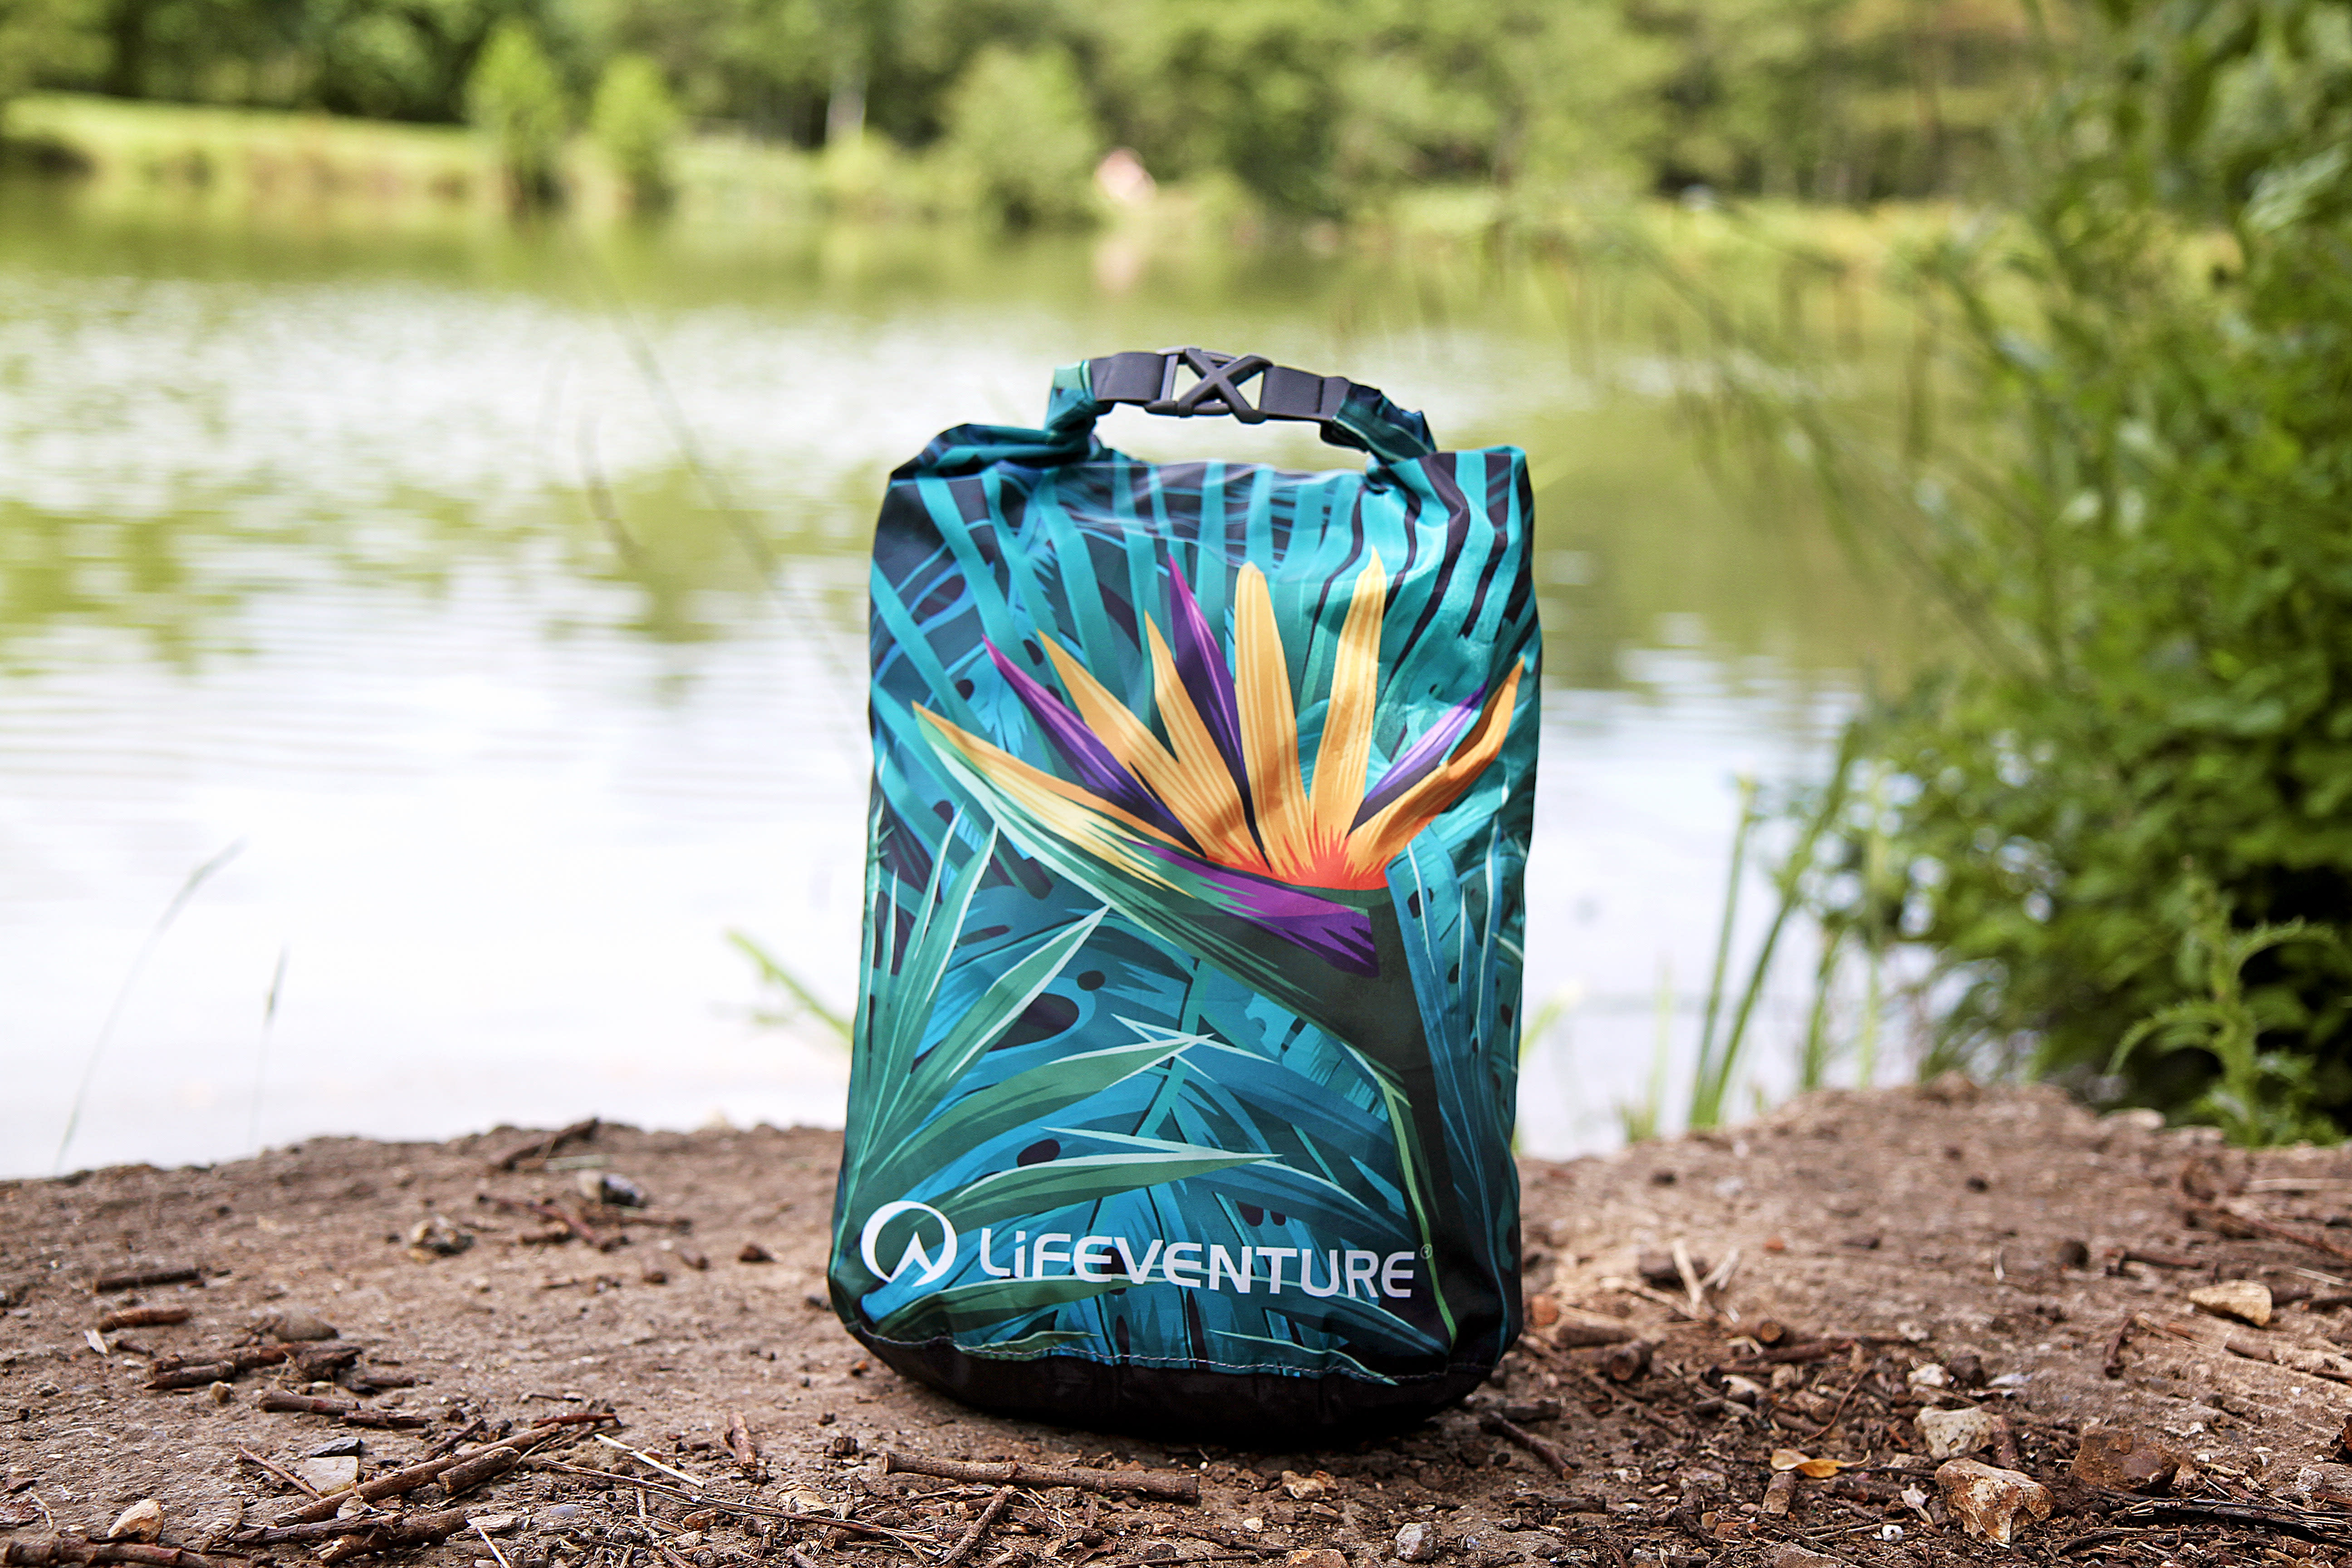 LIFEVENTURE Packable Waterproof Backpack - 22L :: £36.99 :: Luggage / Bags  :: RUCK SACKS :: WHATEVERWHEELS LTD - ATV, Motorbike & Scooter Centre -  Lancashire's Best For Quad, Buggy, 50cc & 125cc Motorcycle and Moped Sale